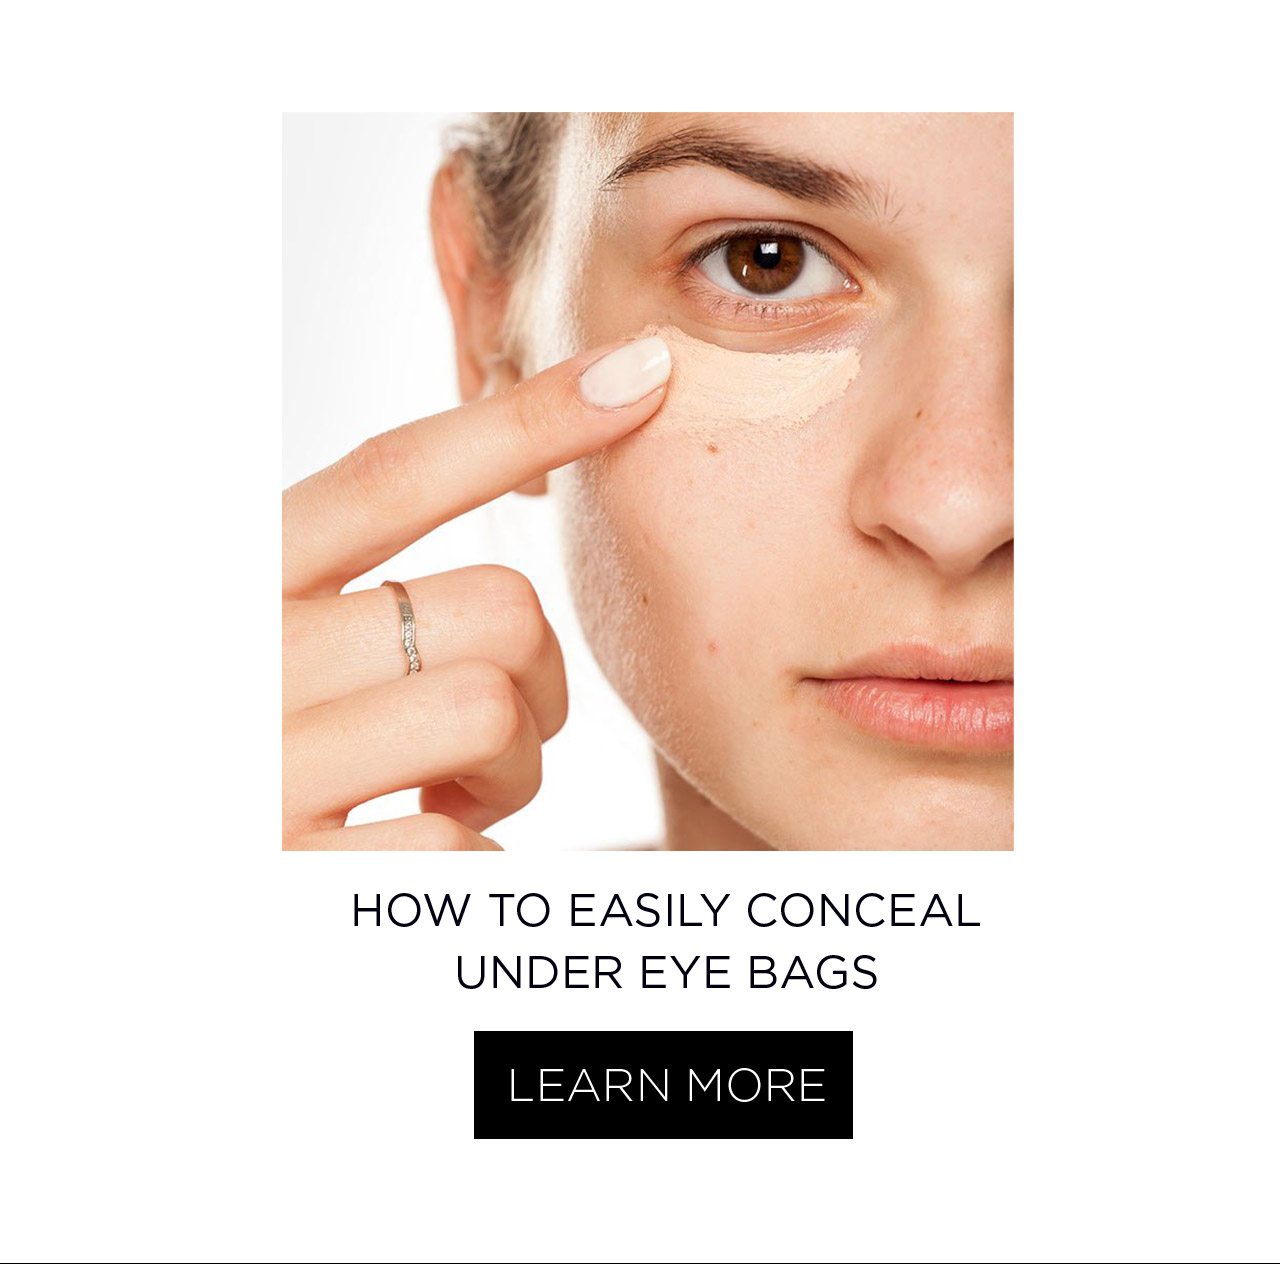 HOW TO EASILY CONCEAL UNDER EYE BAGS - LEARN MORE